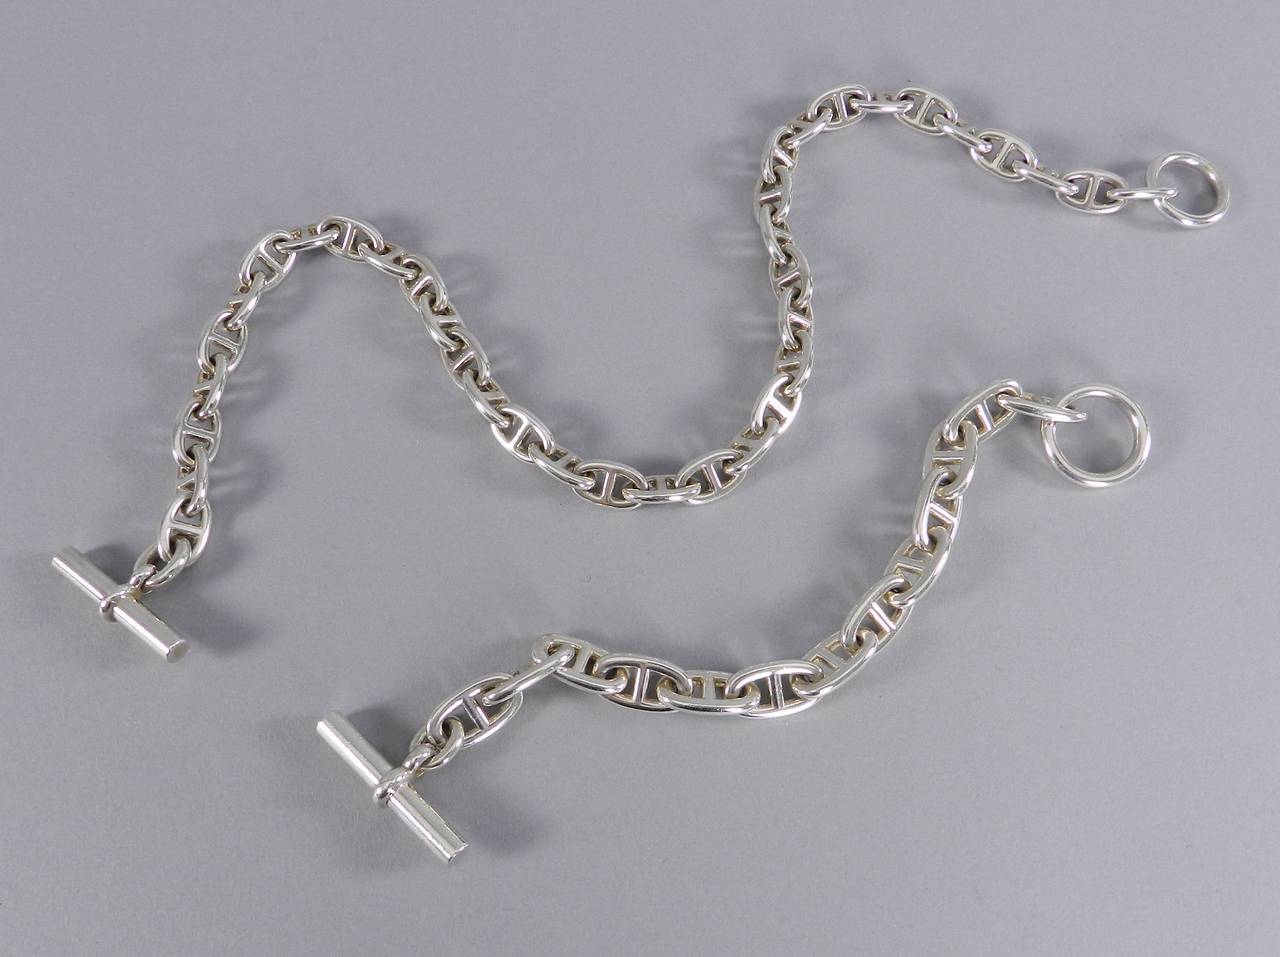 Women's Hermes Chaine d'Ancre Sterling silver Necklace and Bracelet